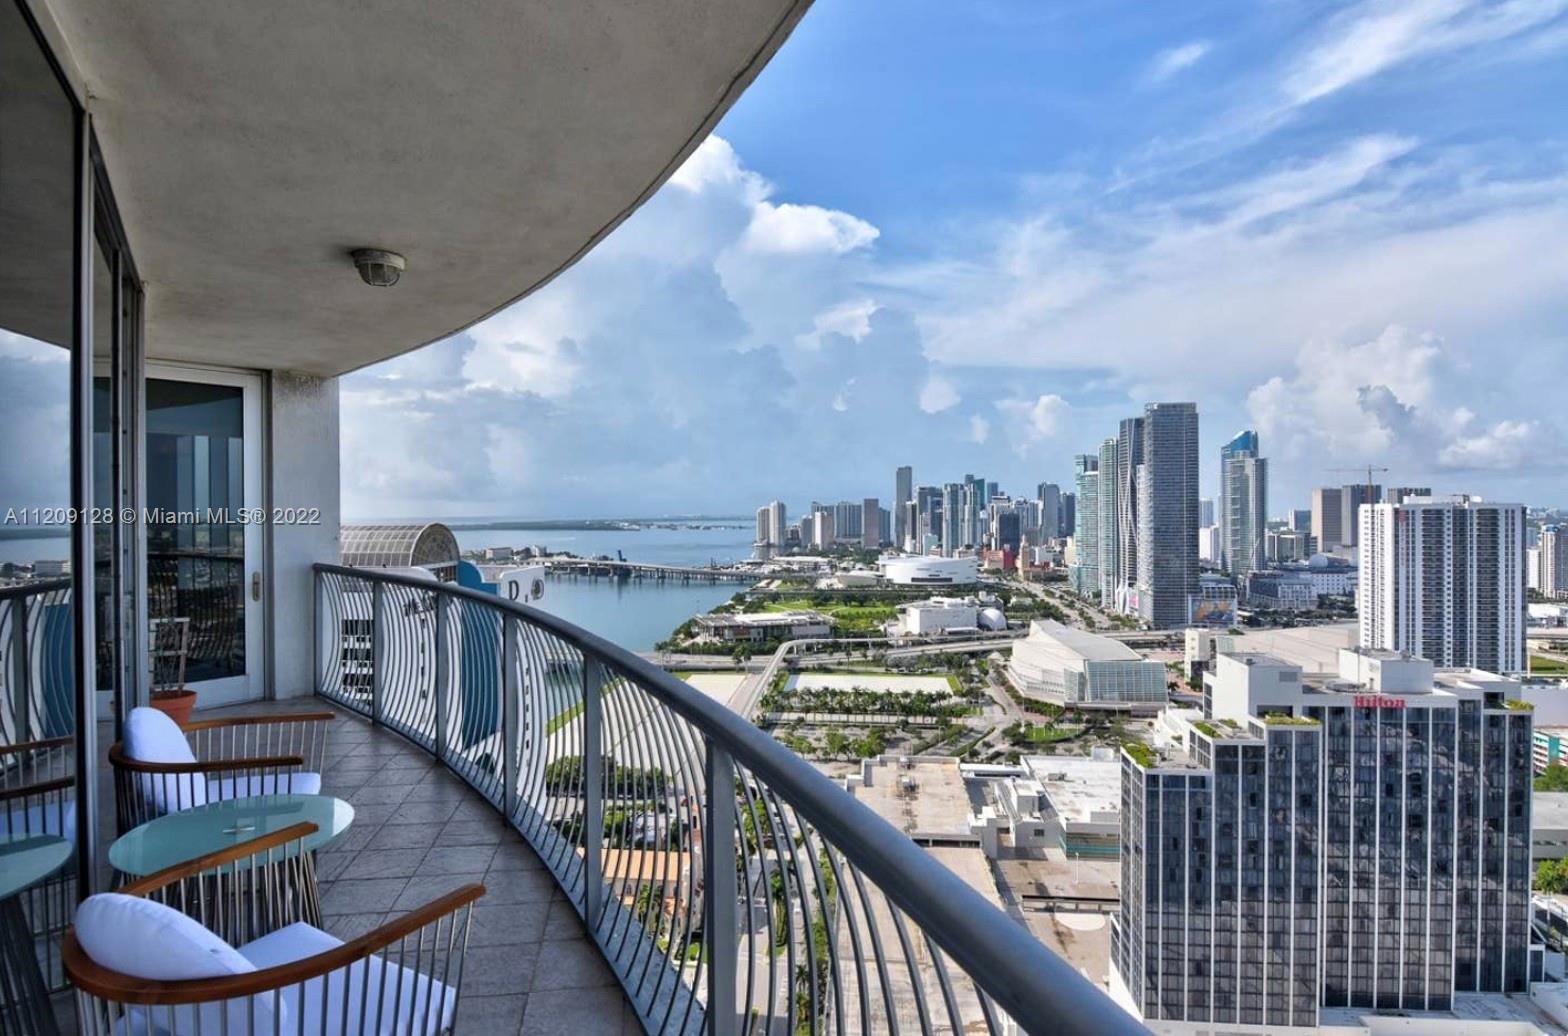 Spectacular views of the Bay, Ocean, and Downtown Miami, Night and day. 2 Beds/2 Baths condo located in the heart of Miami close to the Performing Arts Center, American Airlines Arena, Bayside Marketplace, and within a short driving distance from Miami Beach. Building with many amenities: Spa, pool overlooking the bay, dry cleaner, gym, activity room, valet parking 24 hrs. Public Park across the street and Publix one block away.